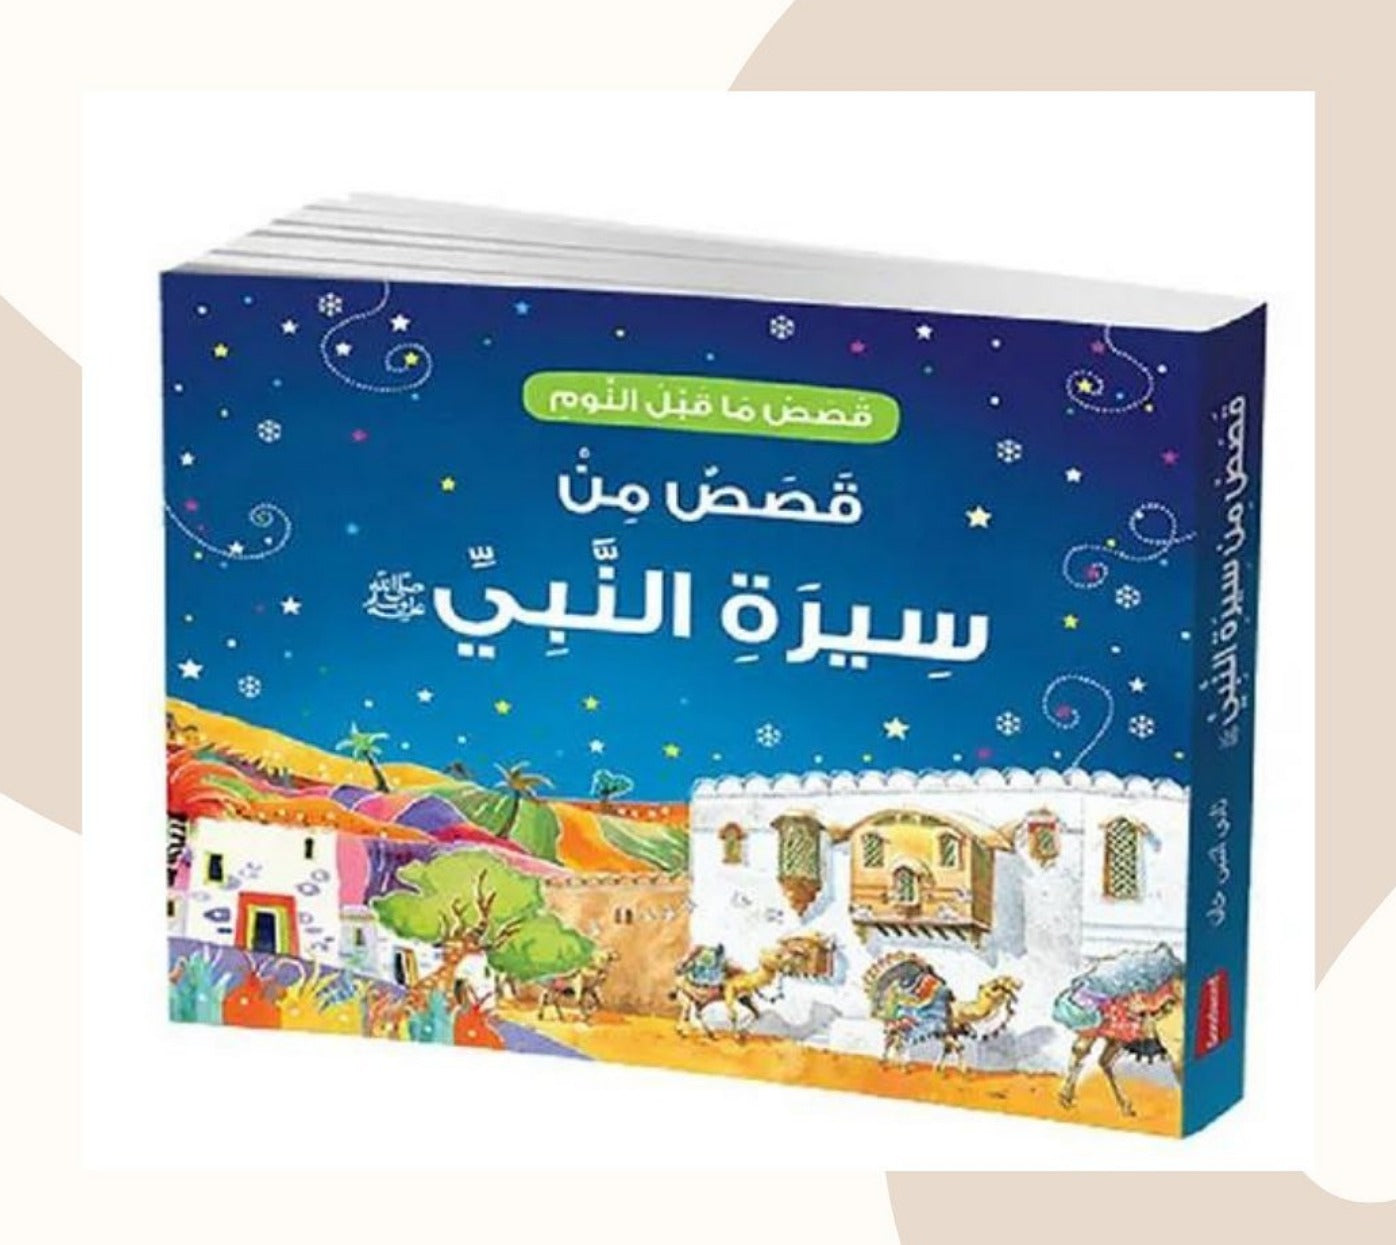 Goodnight Stories from the Life of the Prophet Muhammad - Arabic